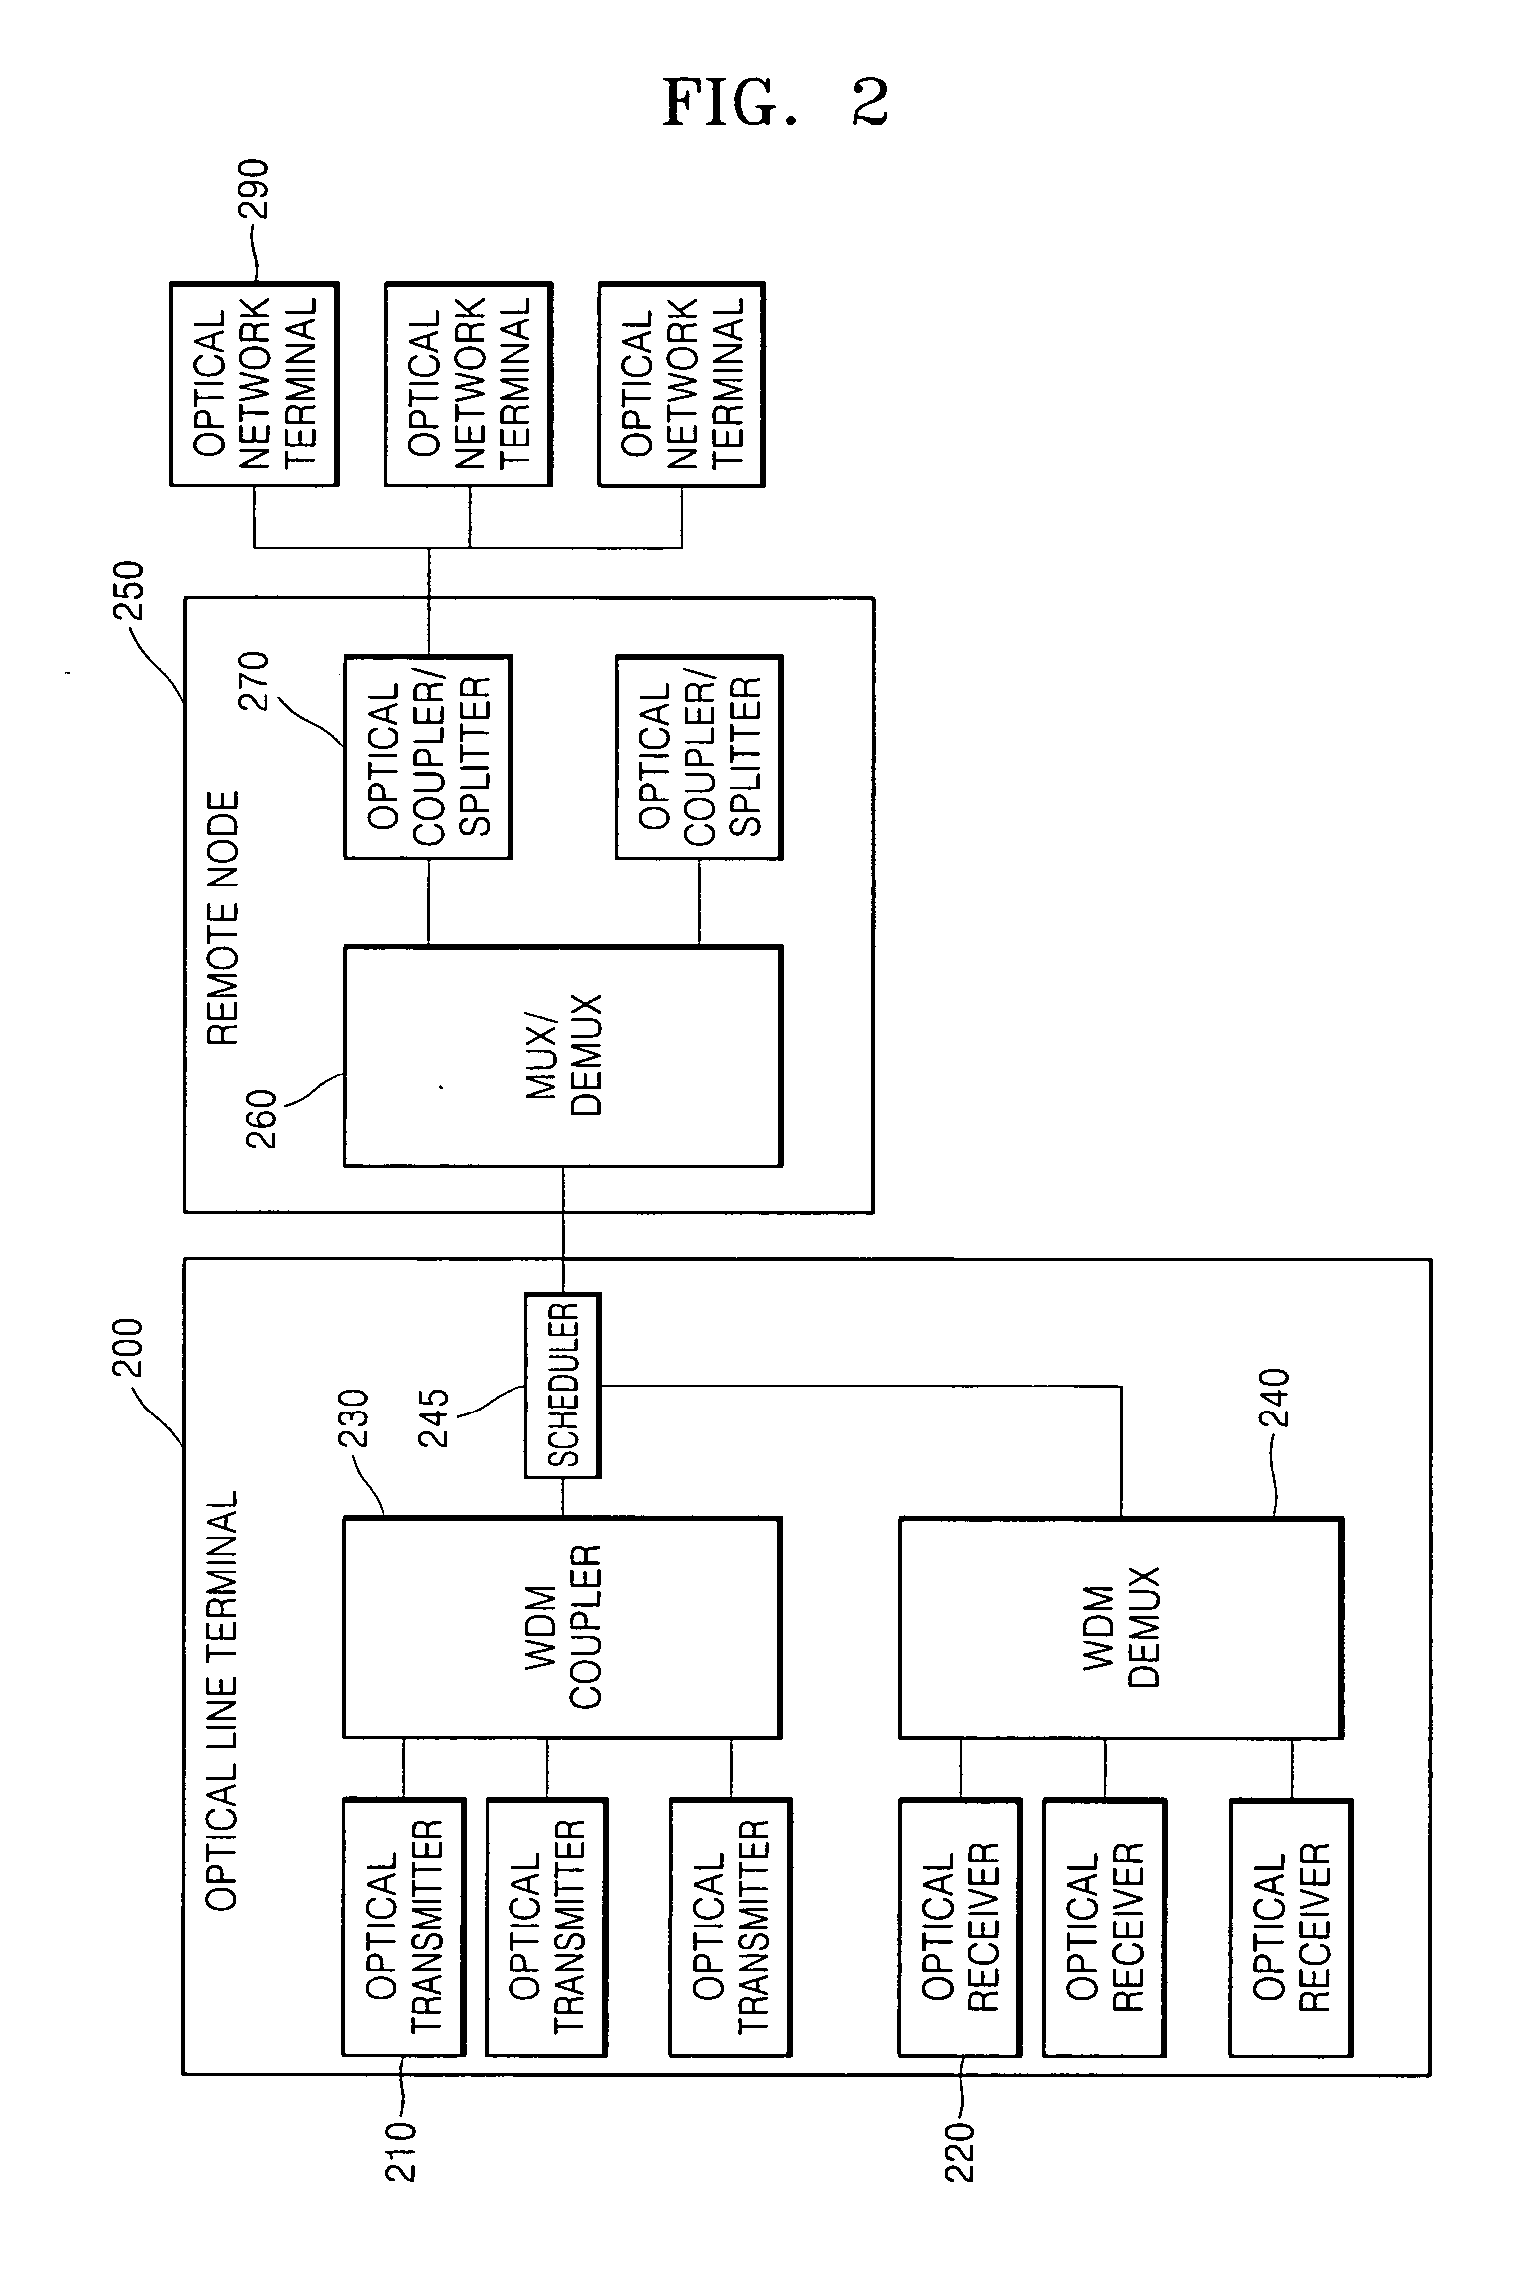 Extendable loop-back type passive optical network and scheduling method and apparatus for the same